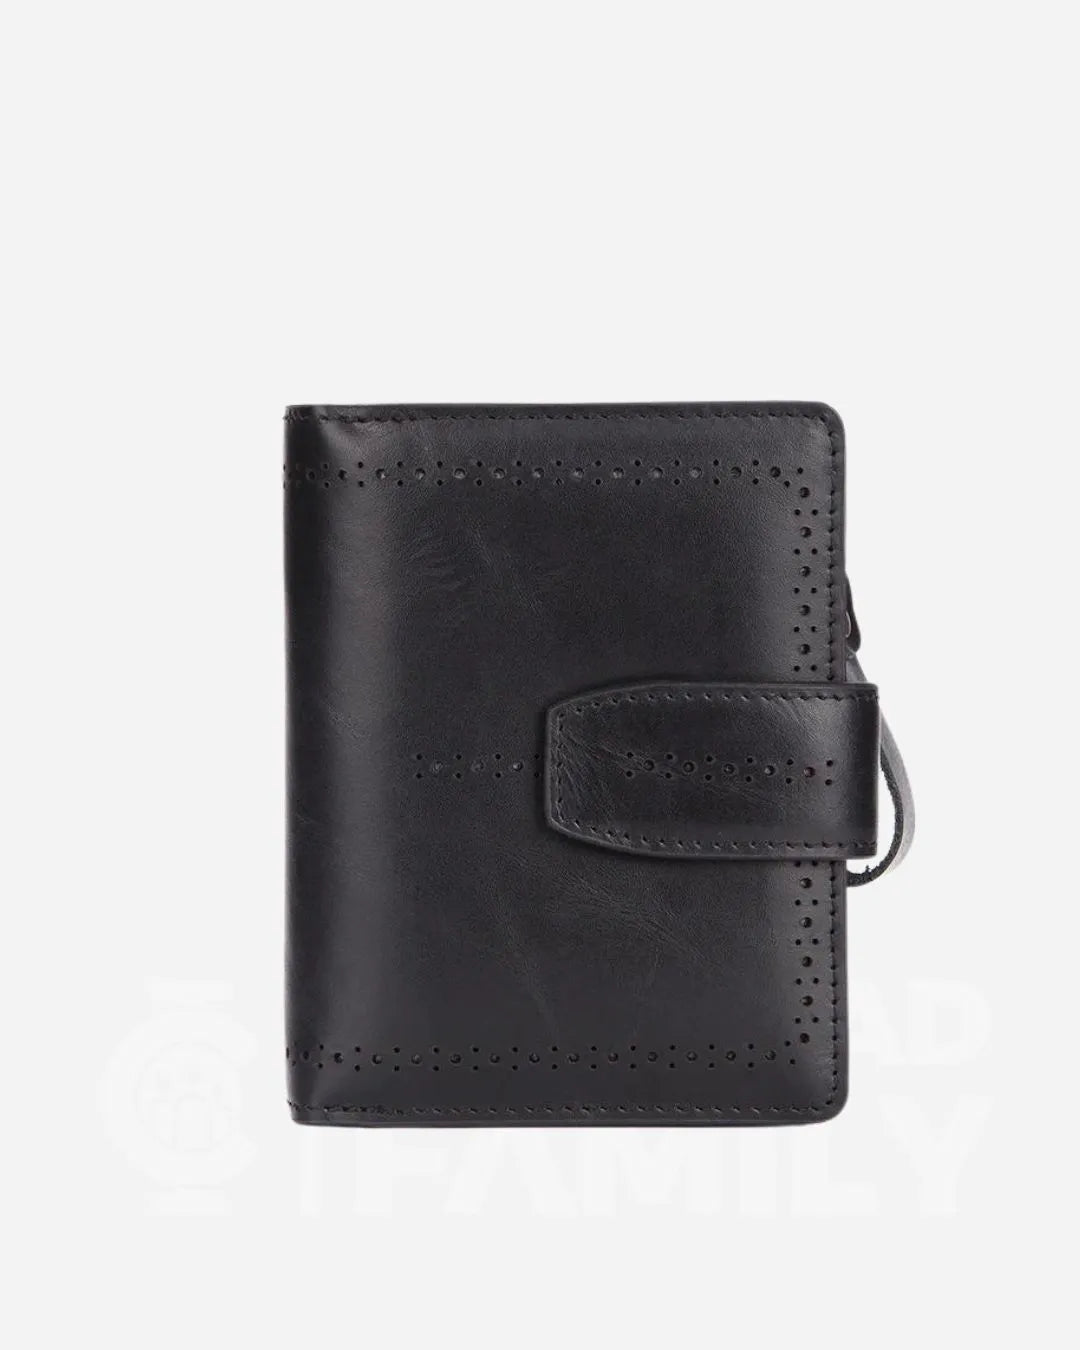 Black leather wallet with a zipper, equipped with RFID blocking